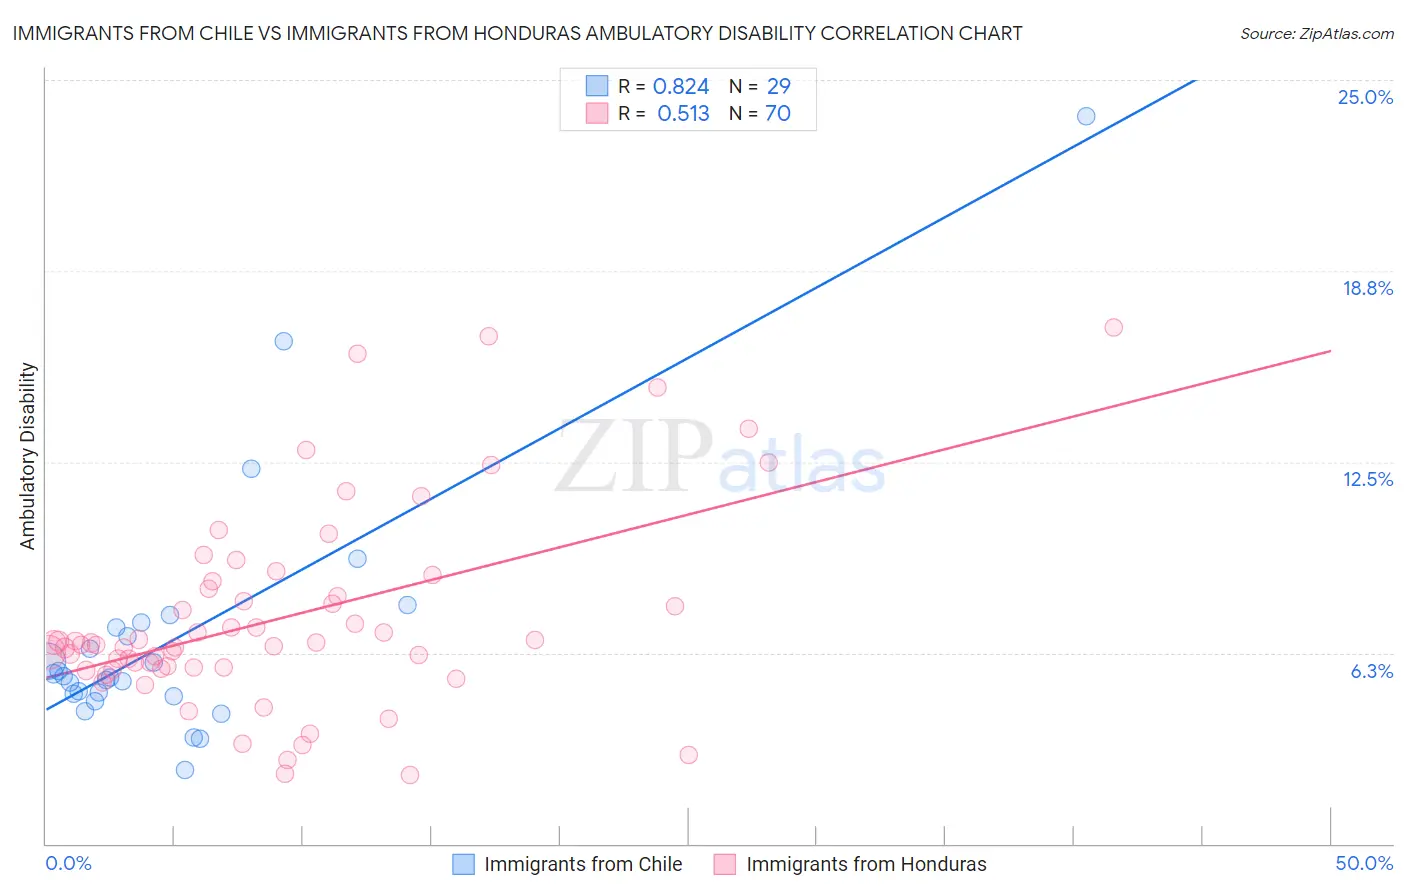 Immigrants from Chile vs Immigrants from Honduras Ambulatory Disability